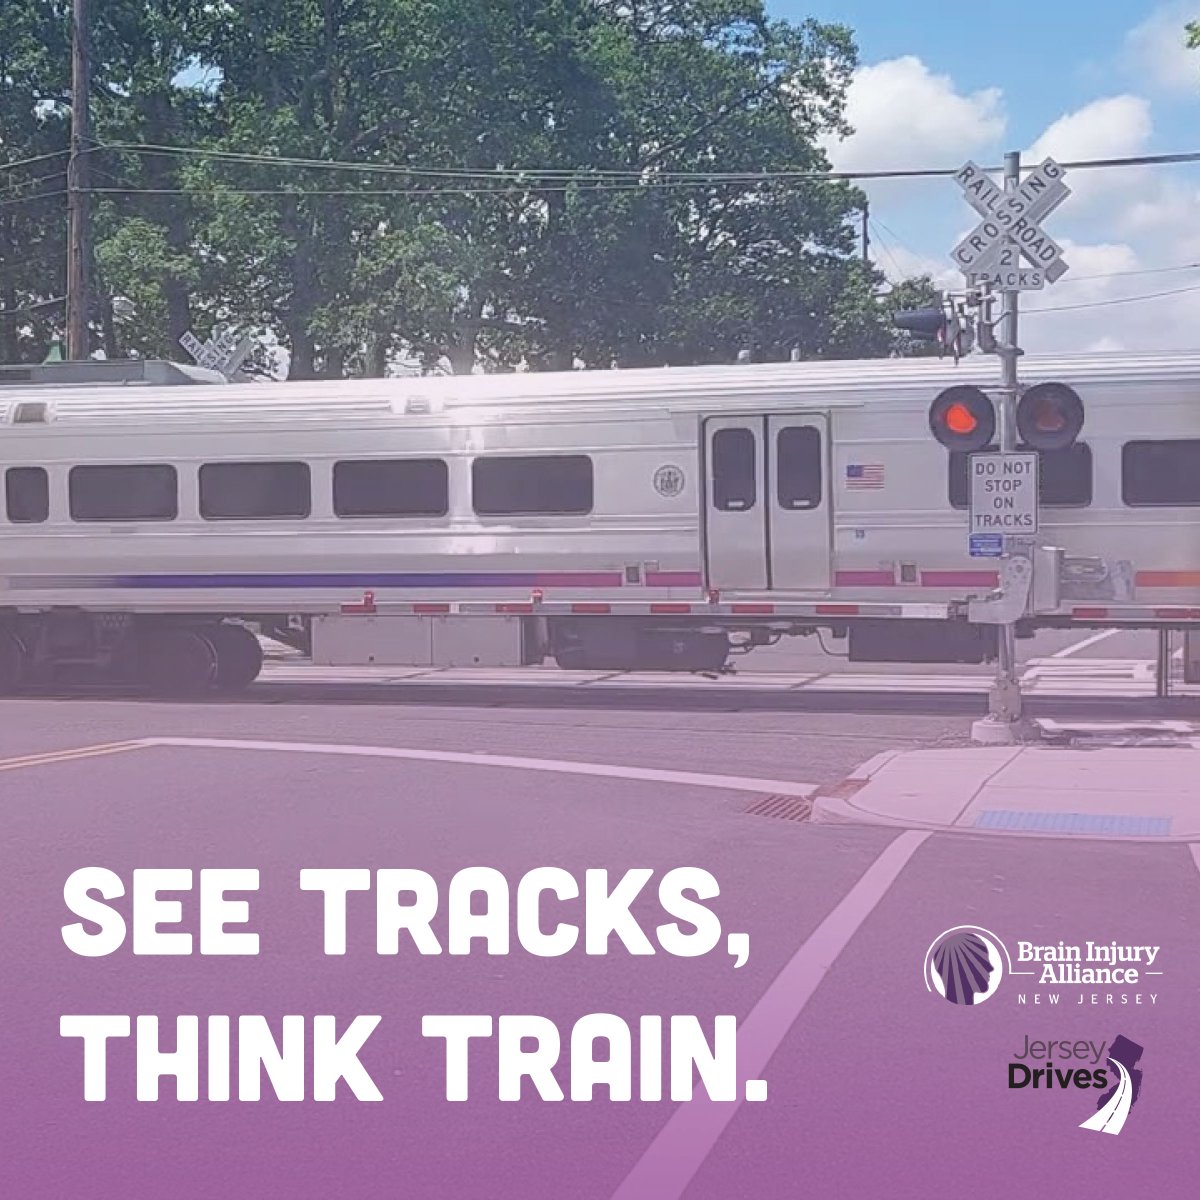 Tomorrow is National Railroad Day! Remember to follow all railway signs and signals. Don’t cross if the lights are flashing or if the gate is down, even if you don’t see a train coming. #NationalRailroadDay #JerseyDrives